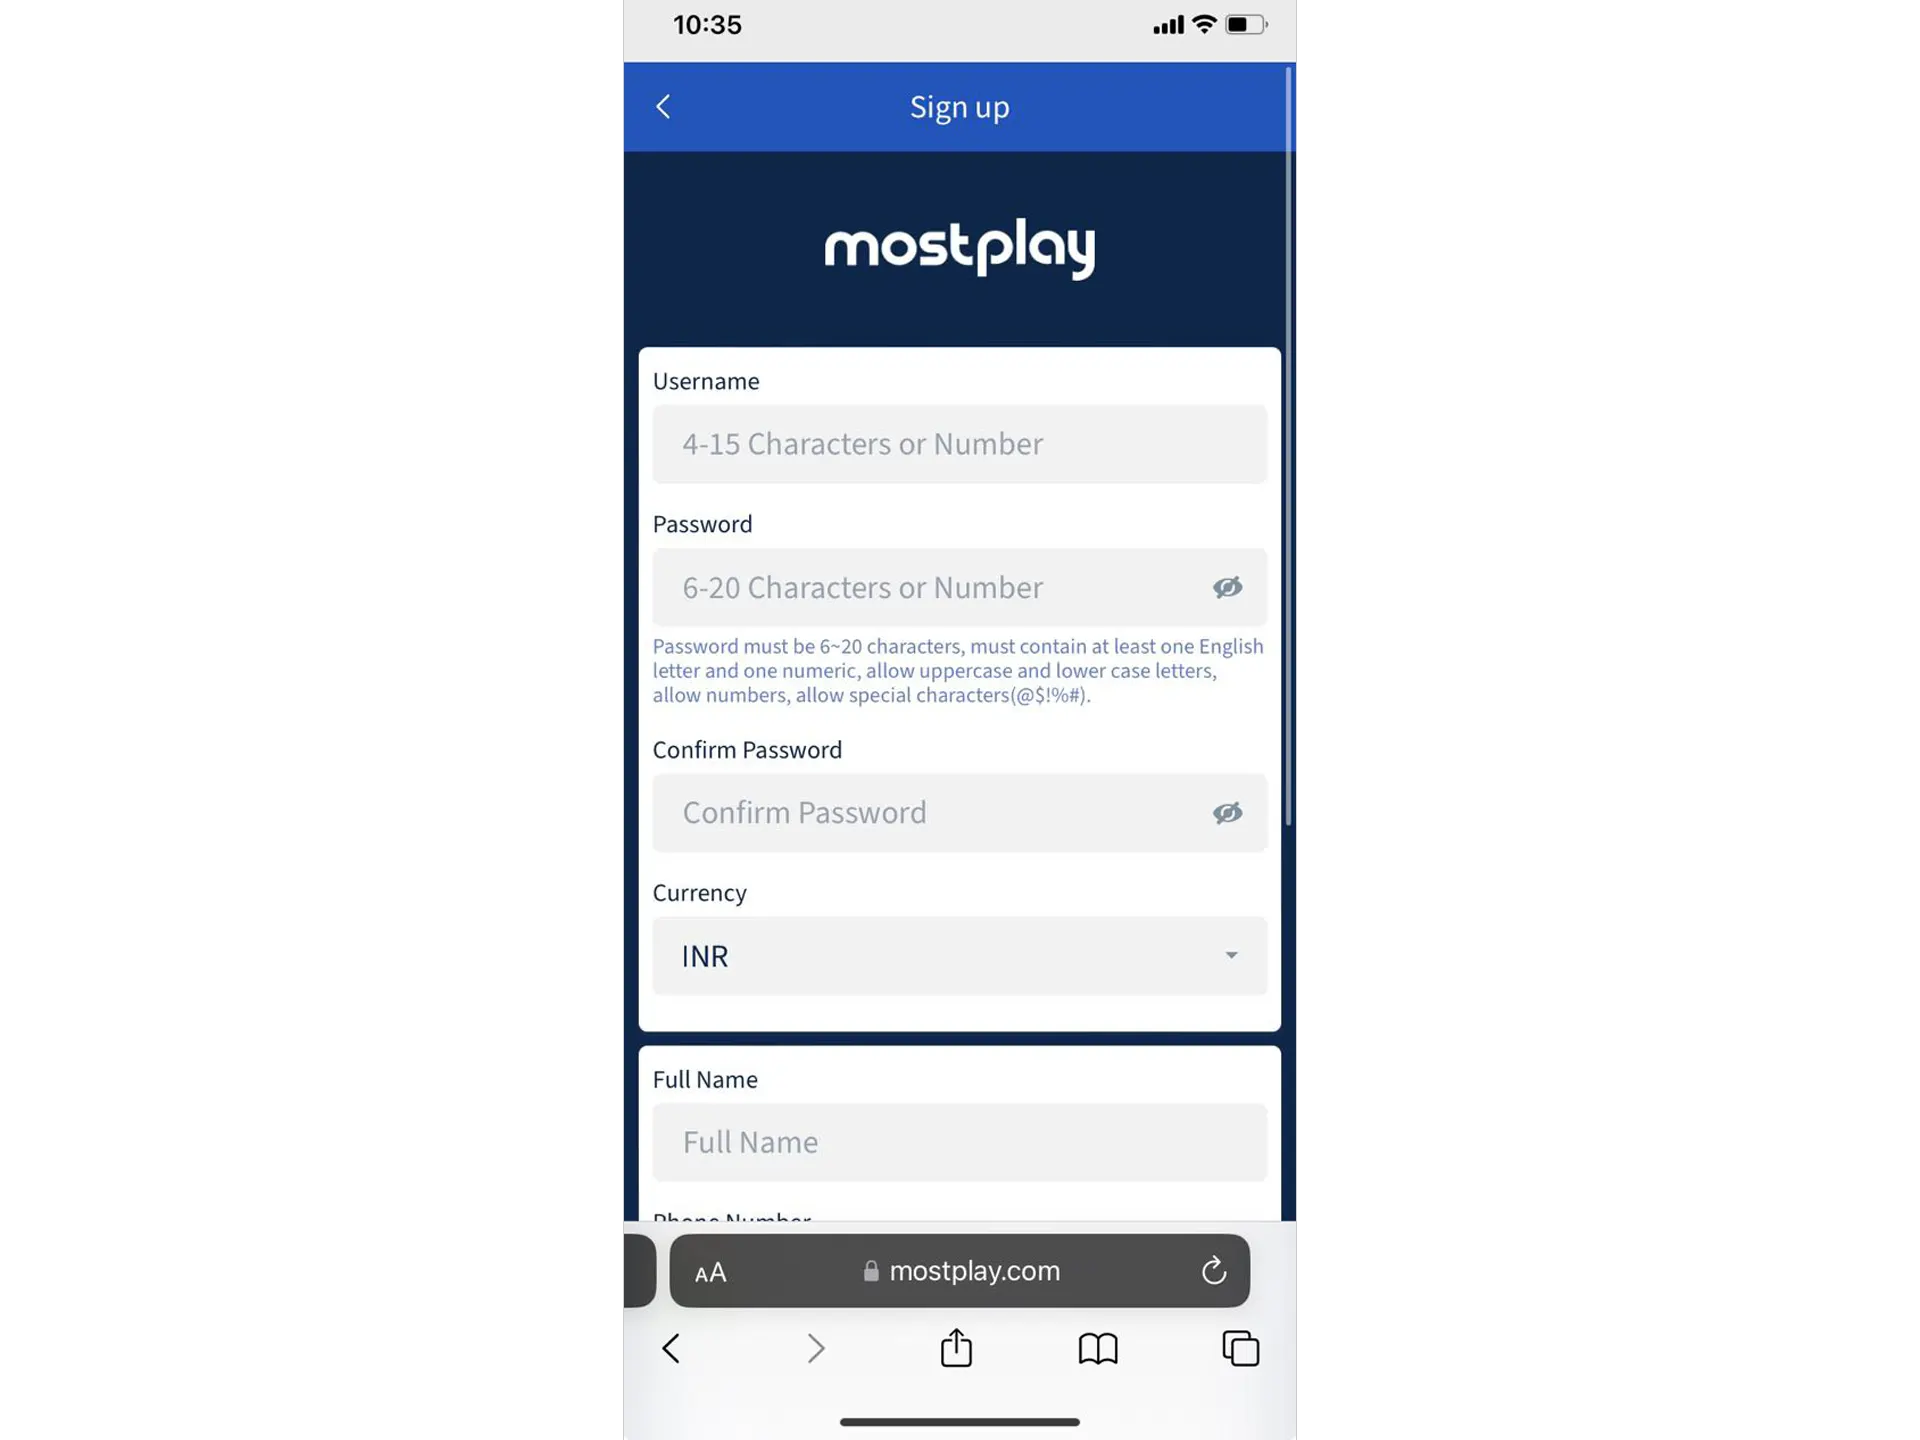 Sign up for MostPlay using your mobile device.